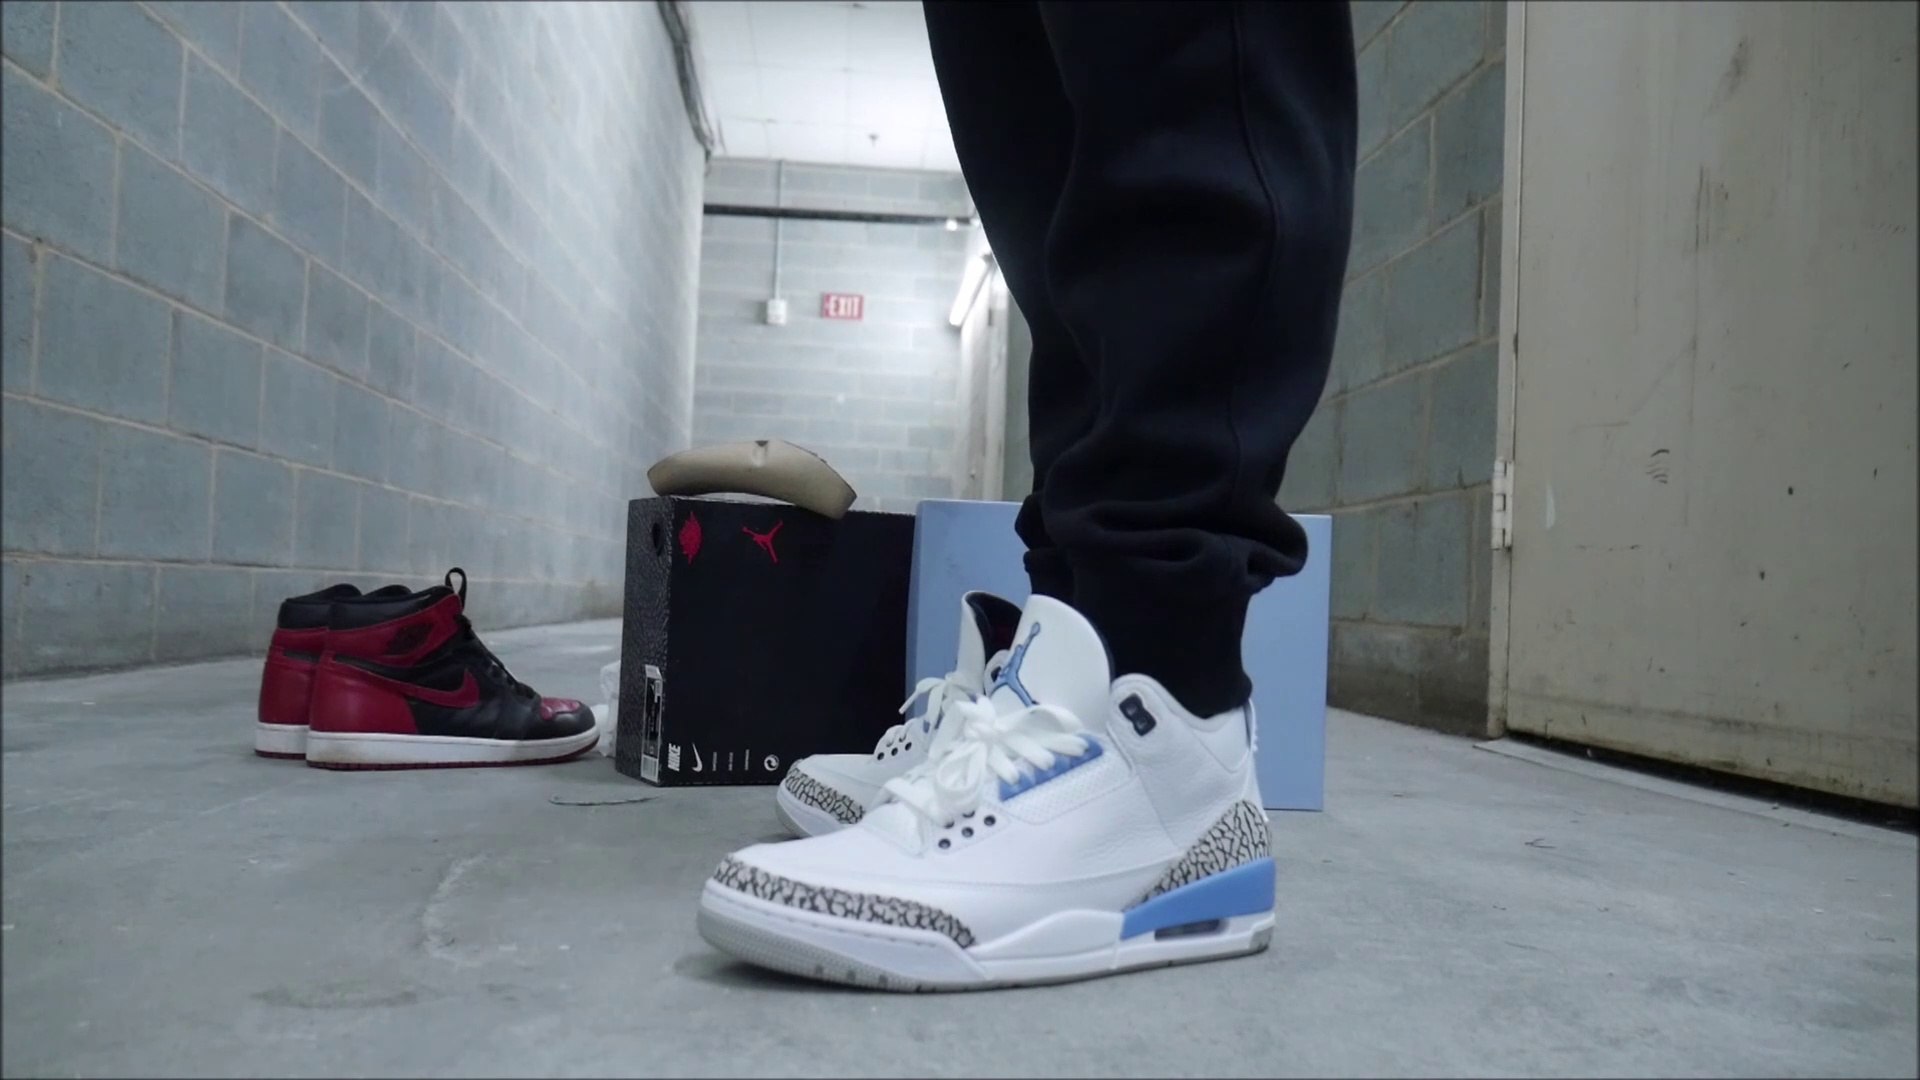 Jordan 3 Unc On Feet Online Discount Shop For Electronics Apparel Toys Books Games Computers Shoes Jewelry Watches Baby Products Sports Outdoors Office Products Bed Bath Furniture Tools Hardware